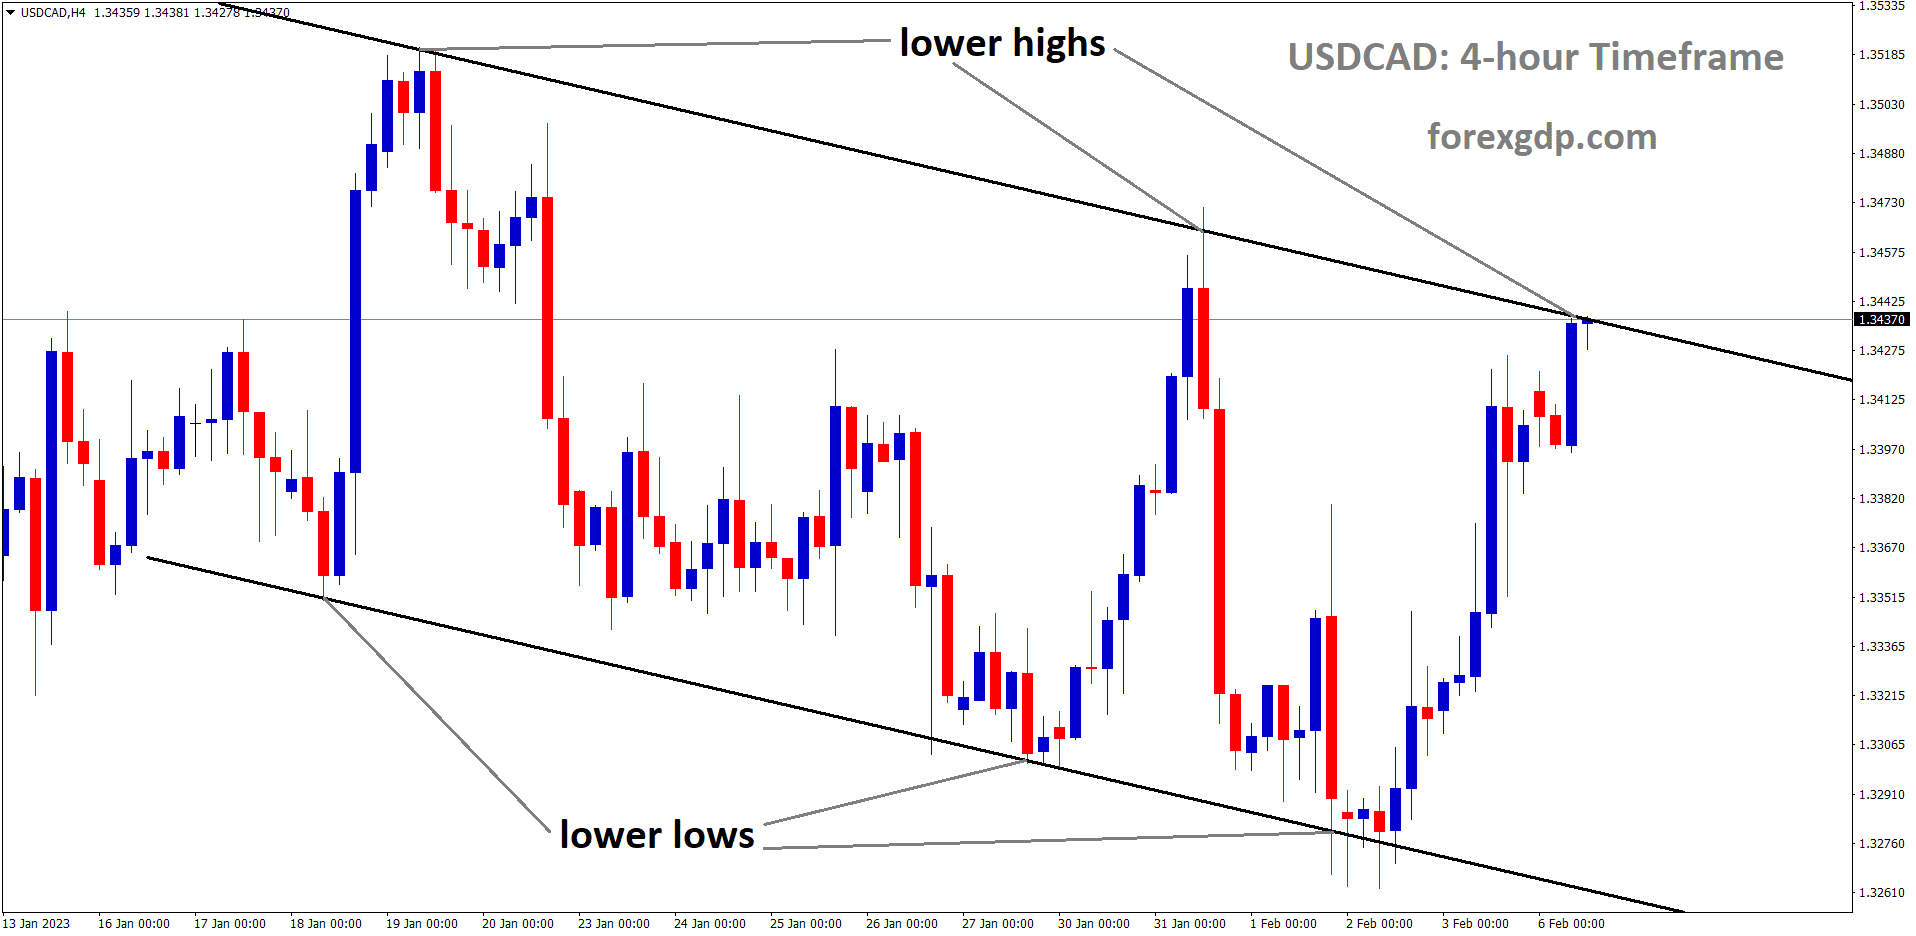 USDCAD is moving in Descending Channel and the market has reached the lower high area of the channel.